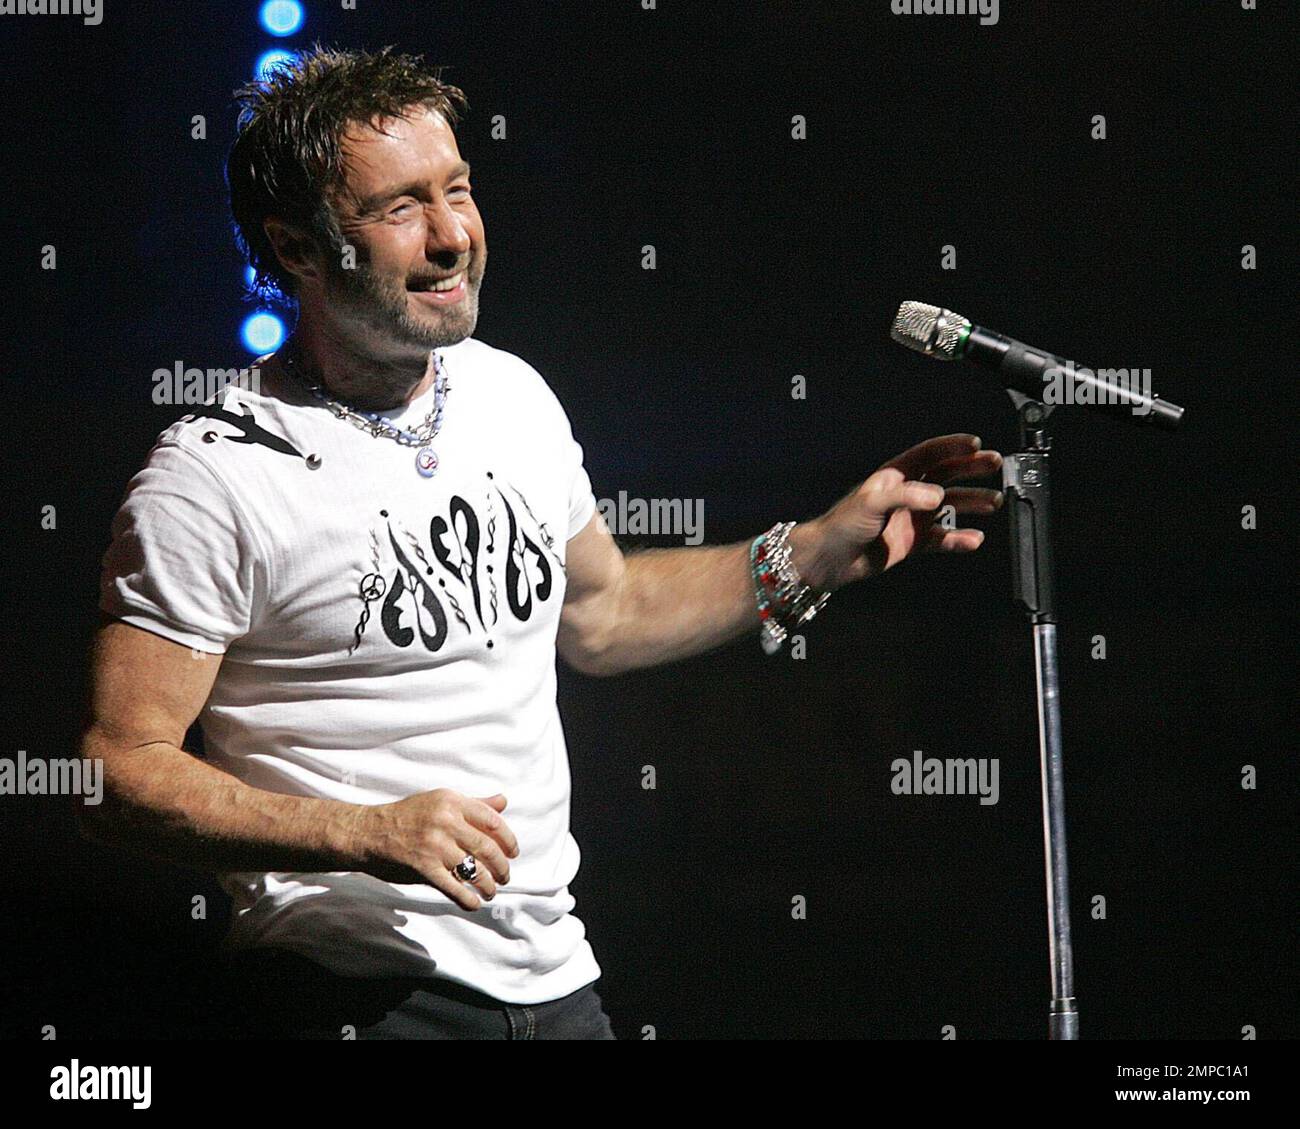 Singer Paul Rodgers of Bad Company performs in concert at the Seminole Hard Rock Hotel & Casino in Hollywood, FL. 8/8/08. Stock Photo